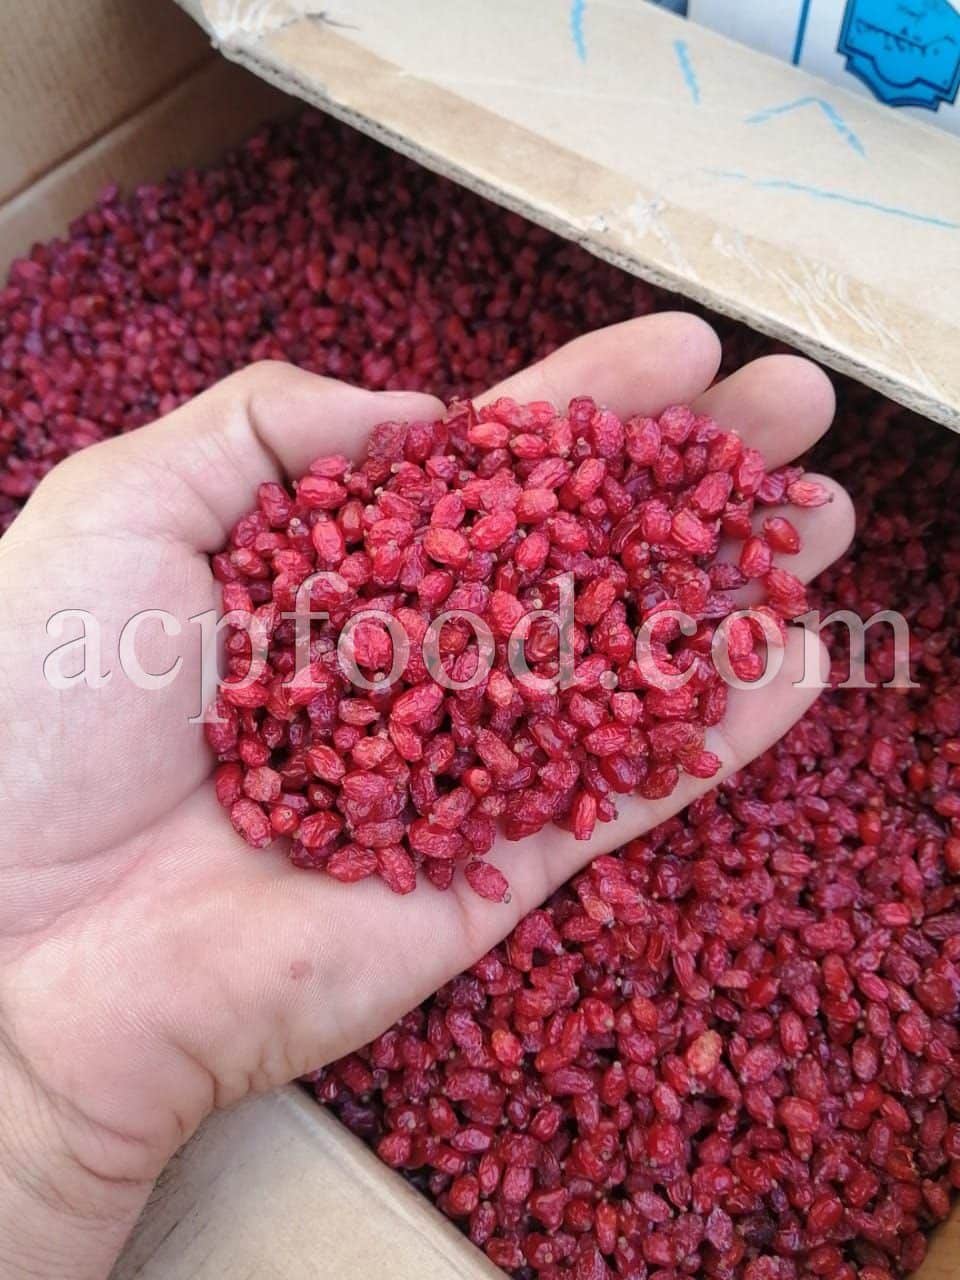 Bulk Dried Barberry for Sale. Barberry Wholesaler, Supplier, Exporter and Provider. Buy High Quality Dried Barberry with the Best Price.